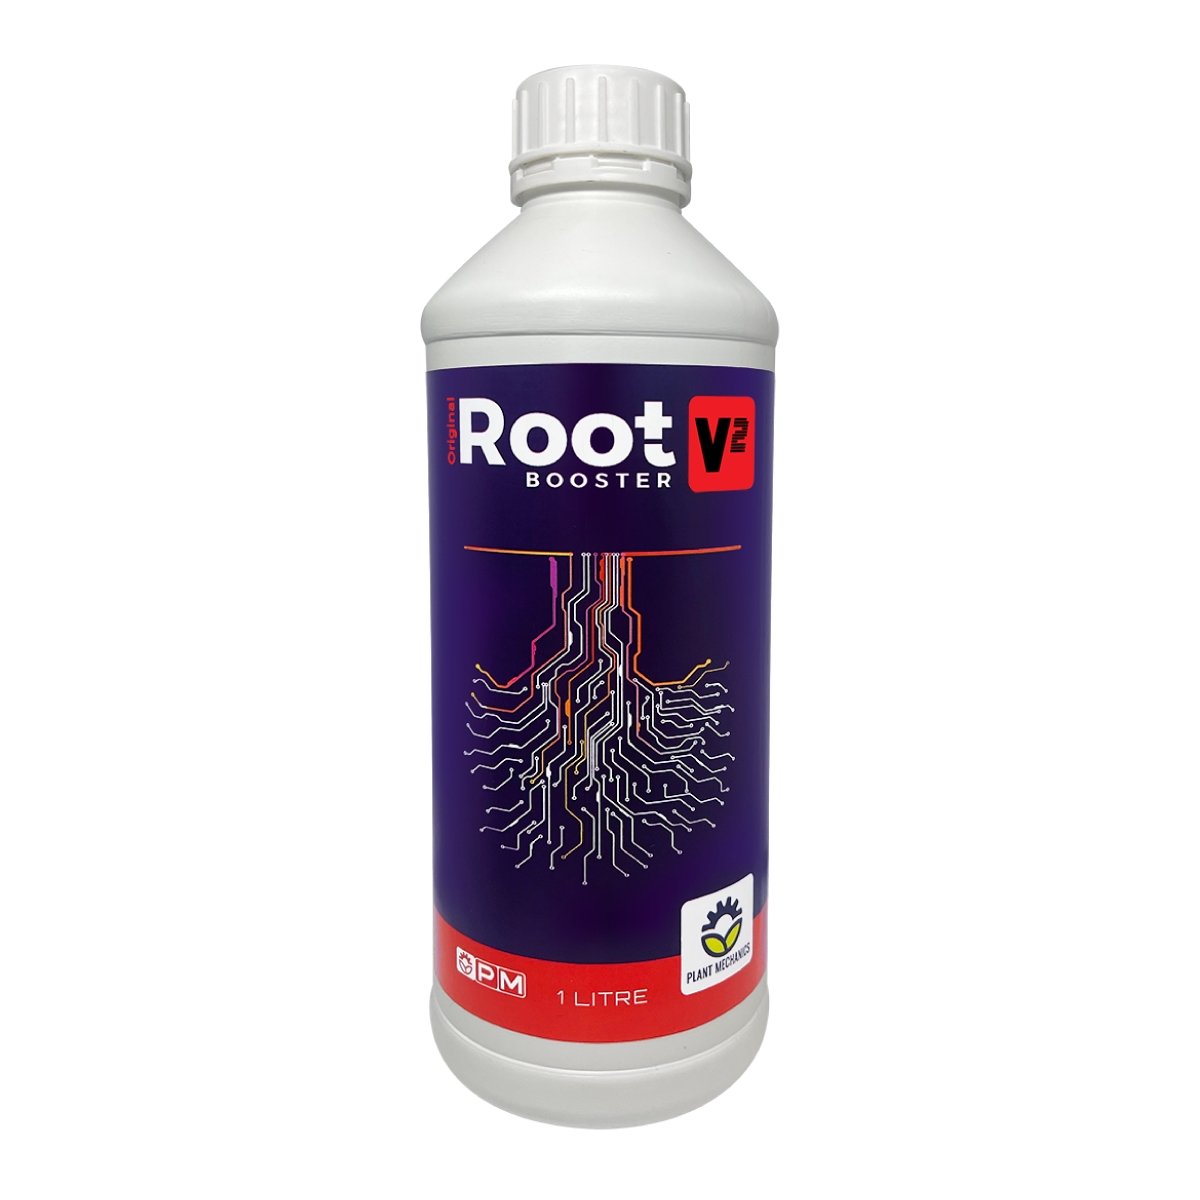 Root Booster V2 - 1L